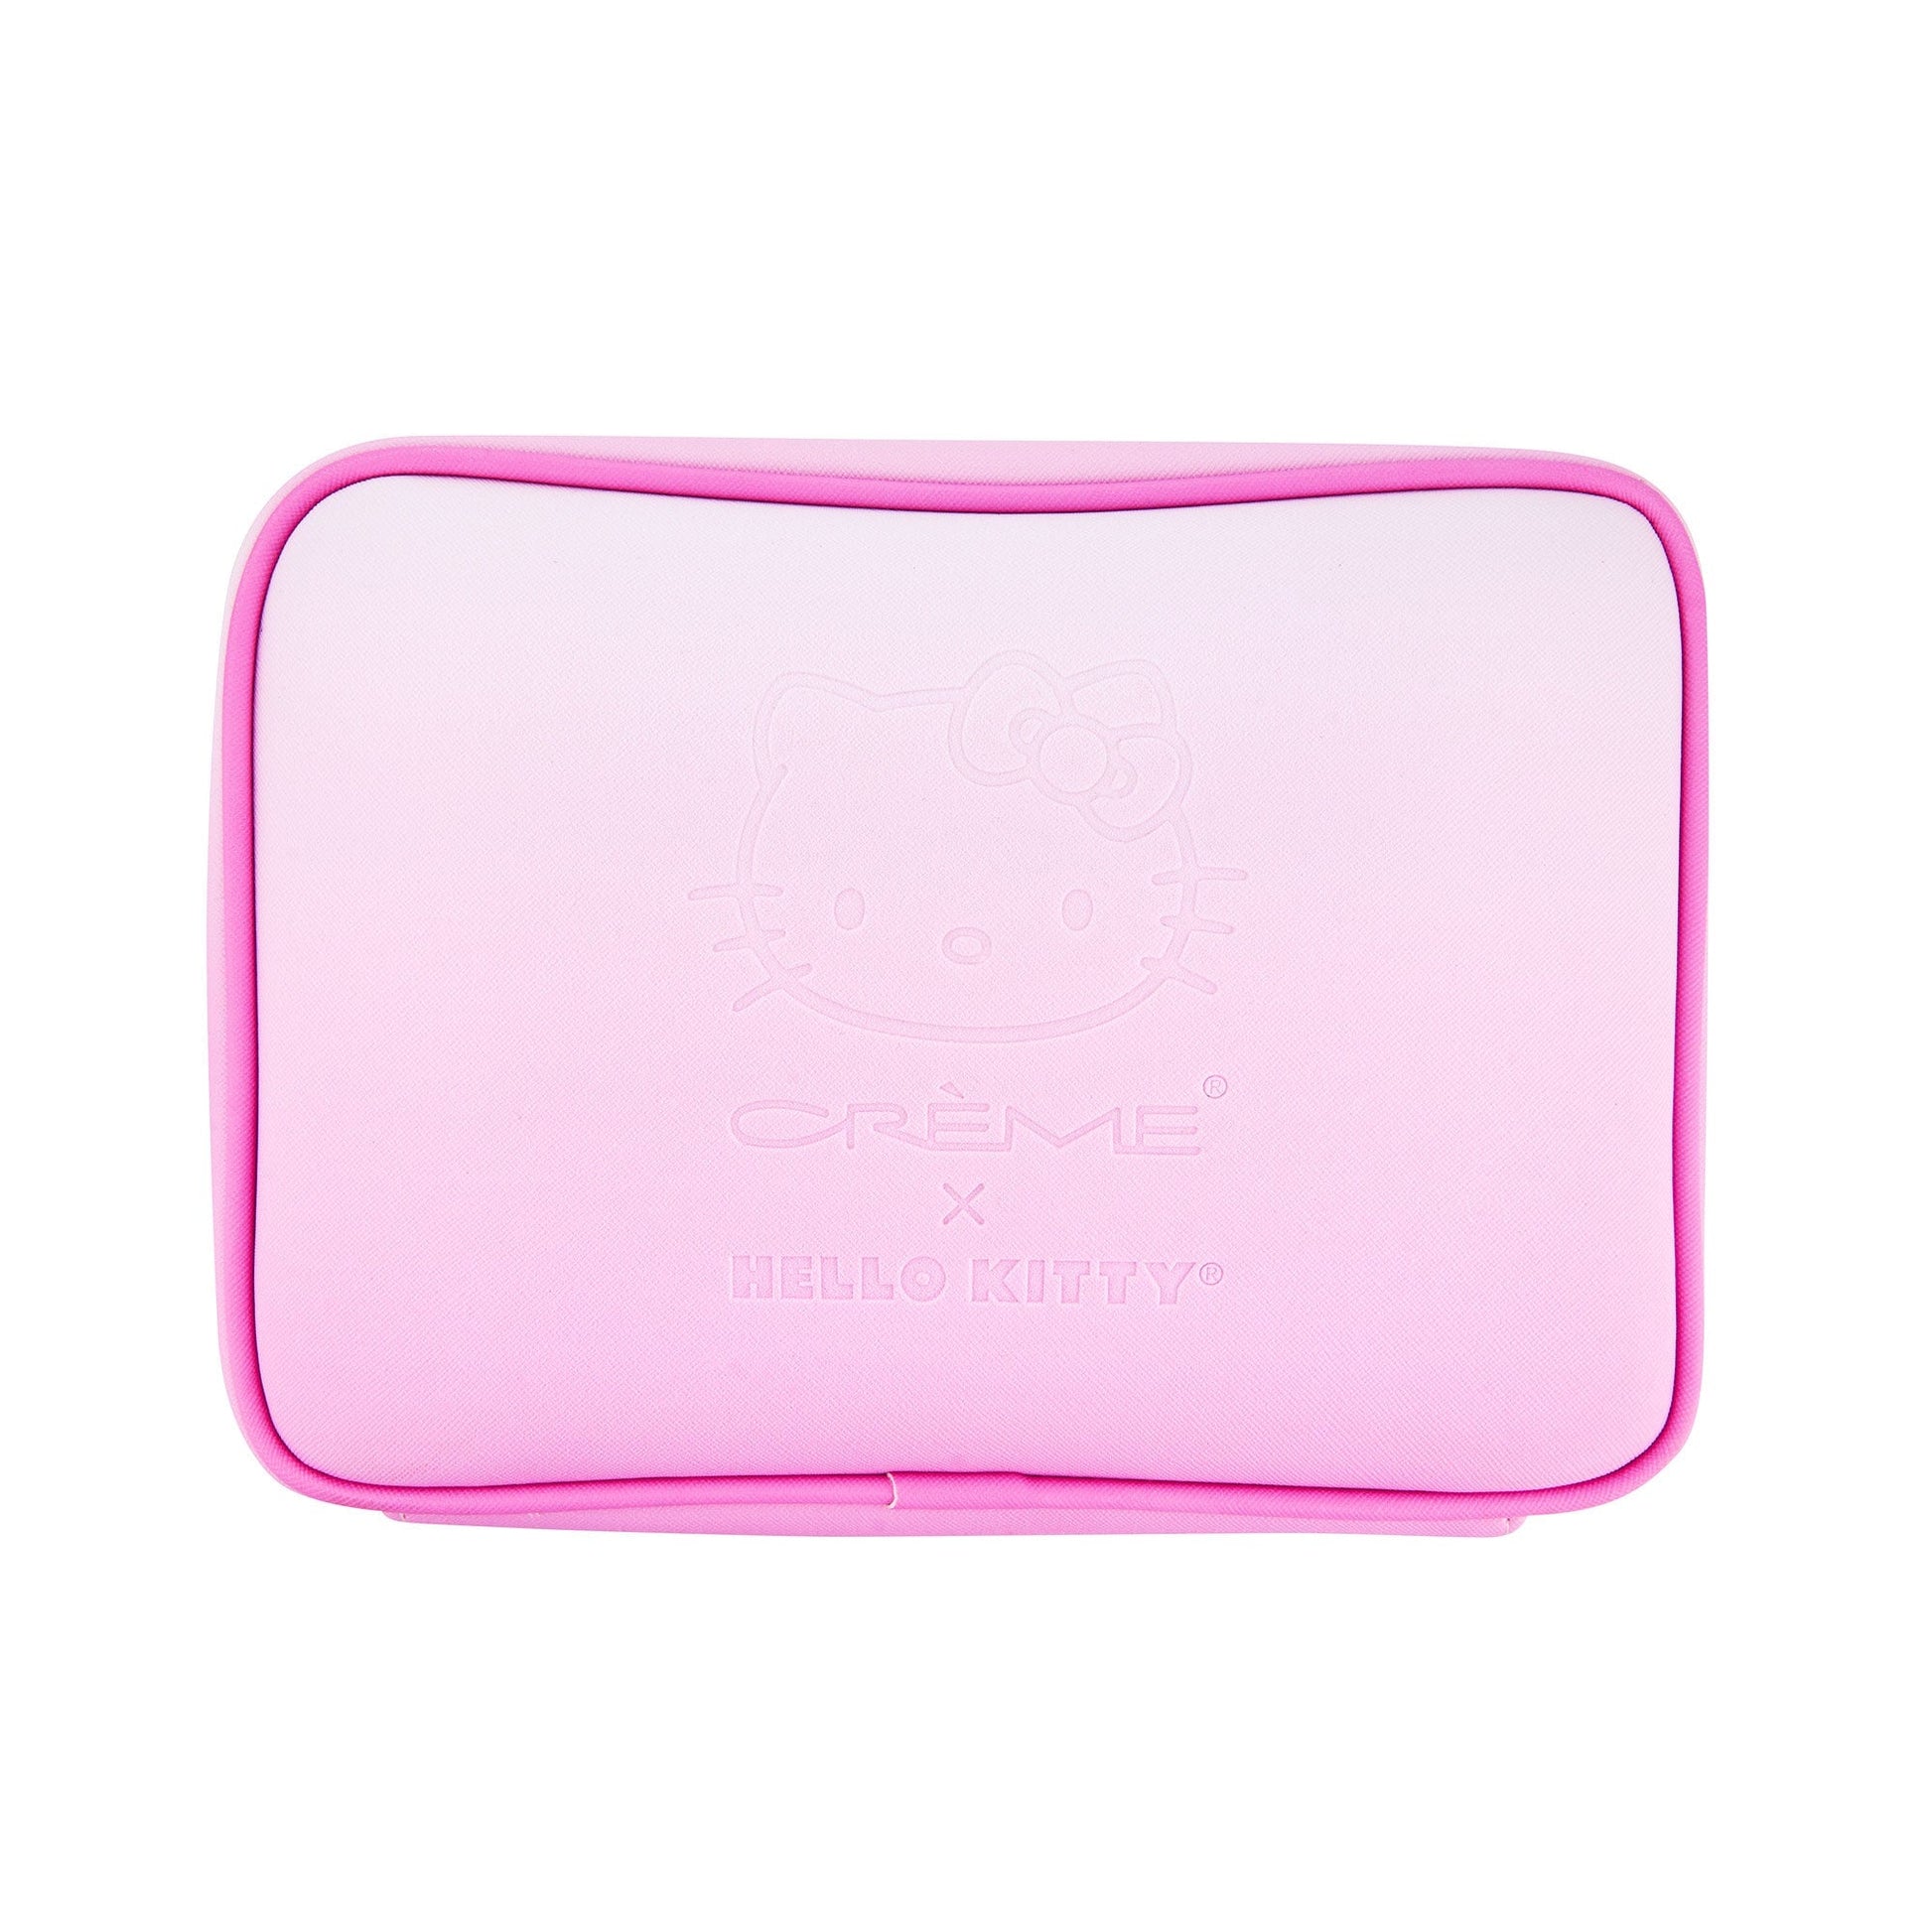 Hello Kitty Perfect Pink Travel Case Makeup Pouch The Crème Shop x Sanrio 